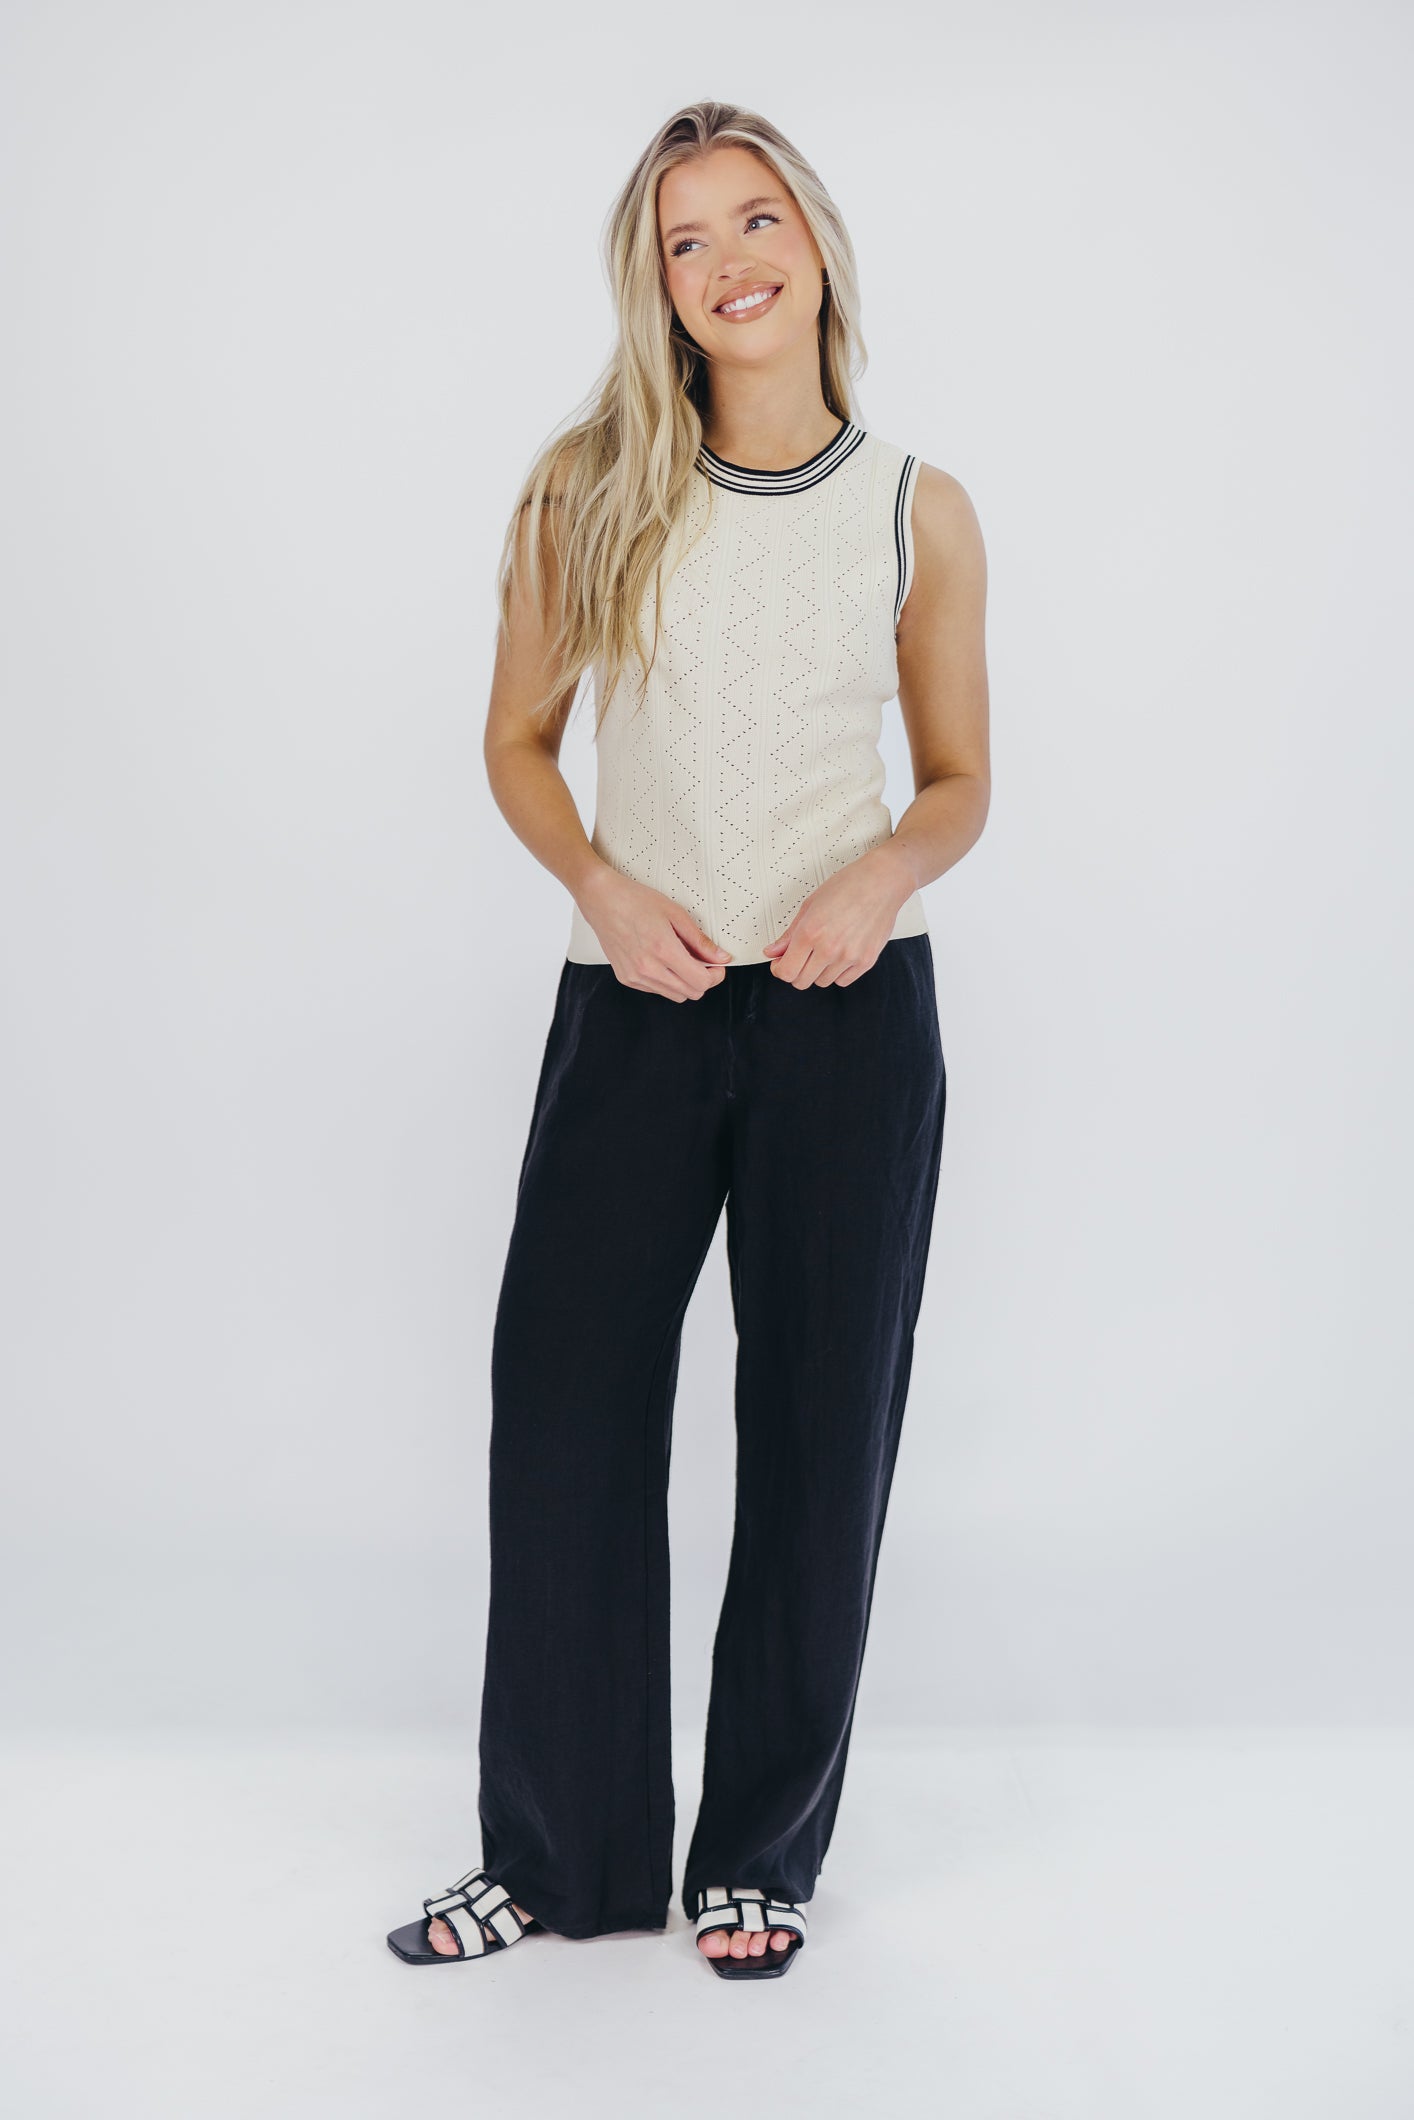 Margaux Contrast Detail Sweater Top in Cream/Black